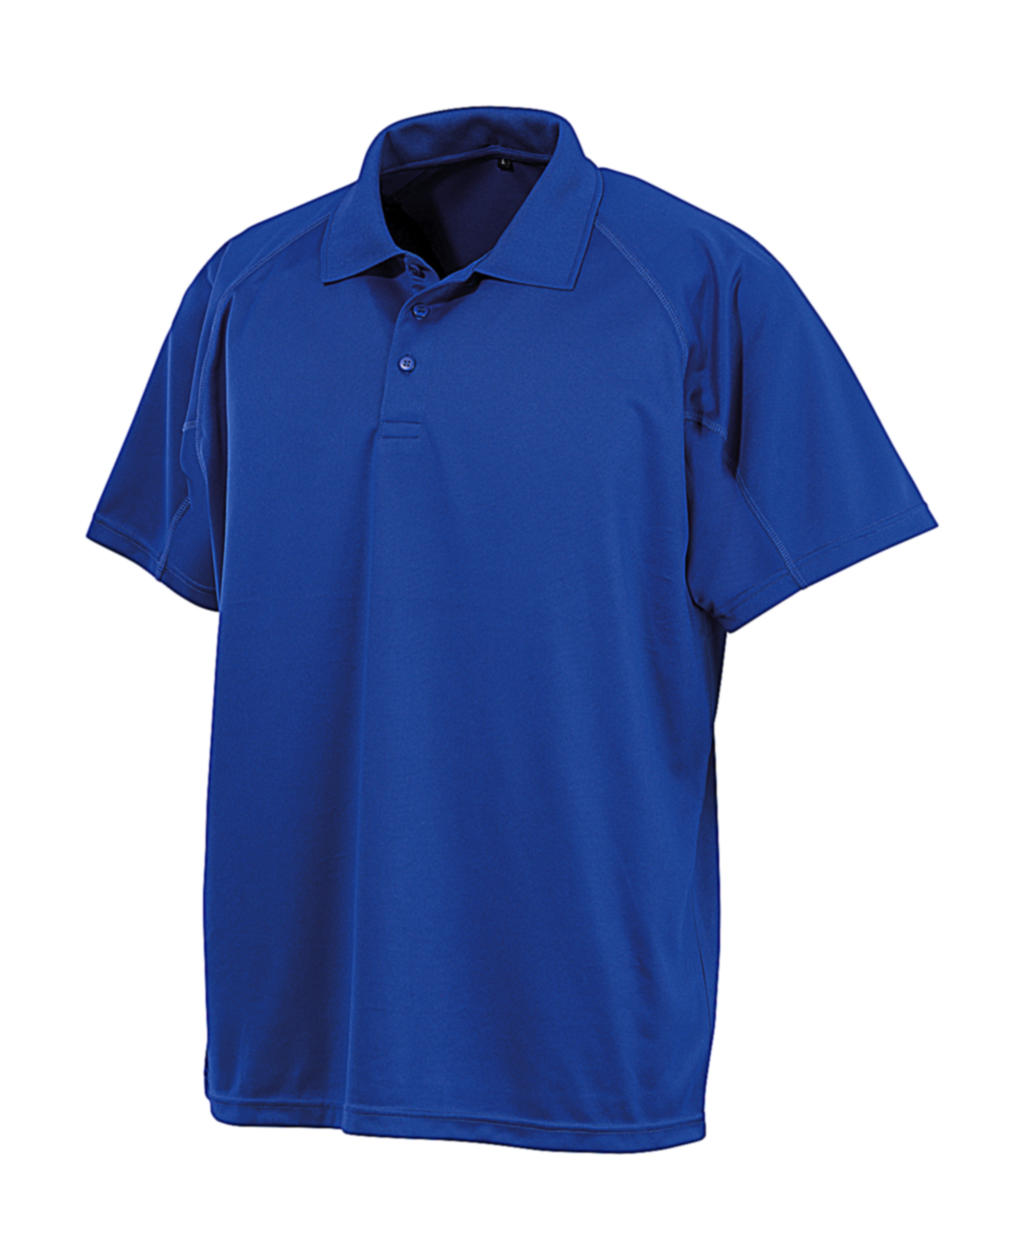  Performance Aircool Polo in Farbe Royal Blue